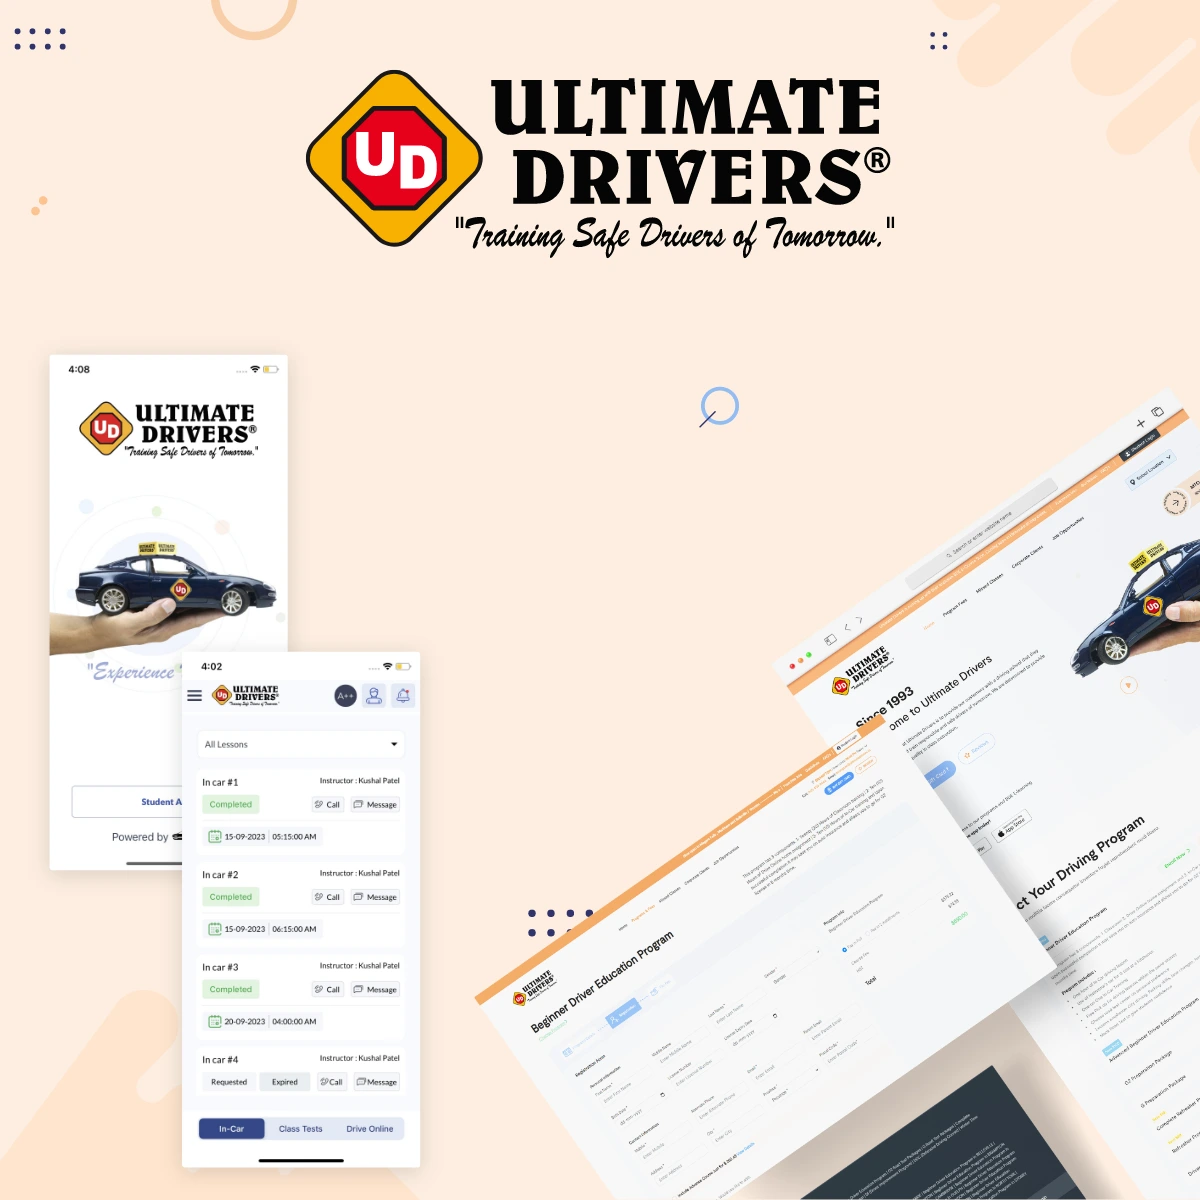 image-case-study-ultimate-drivers-small